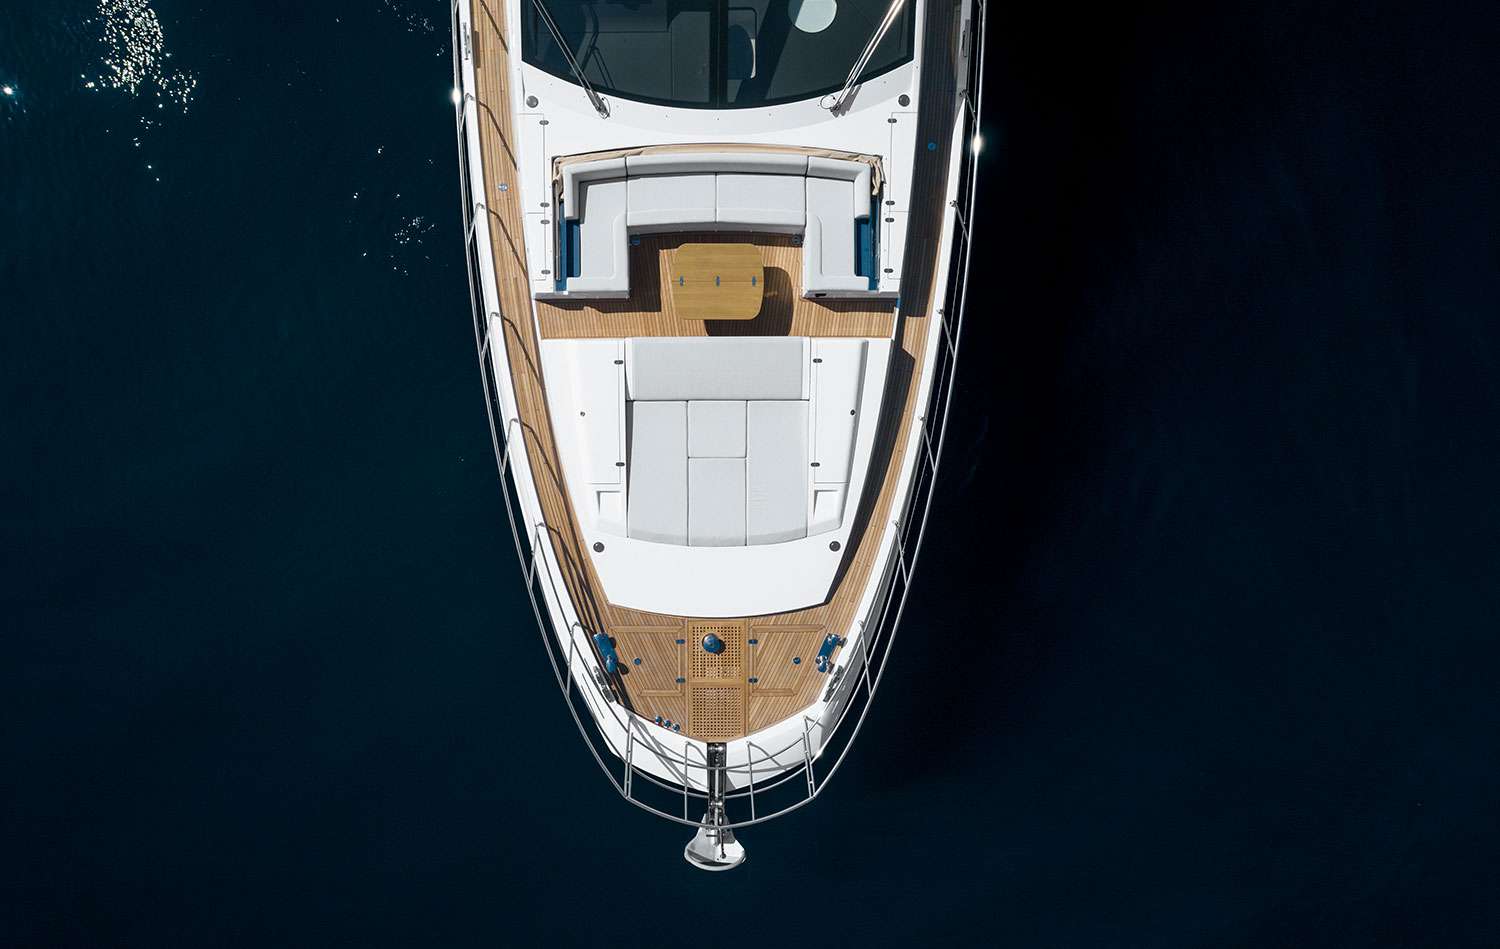 Azimut Yachts-Azimut luxury super yachts available for sale and charter, all in our database.